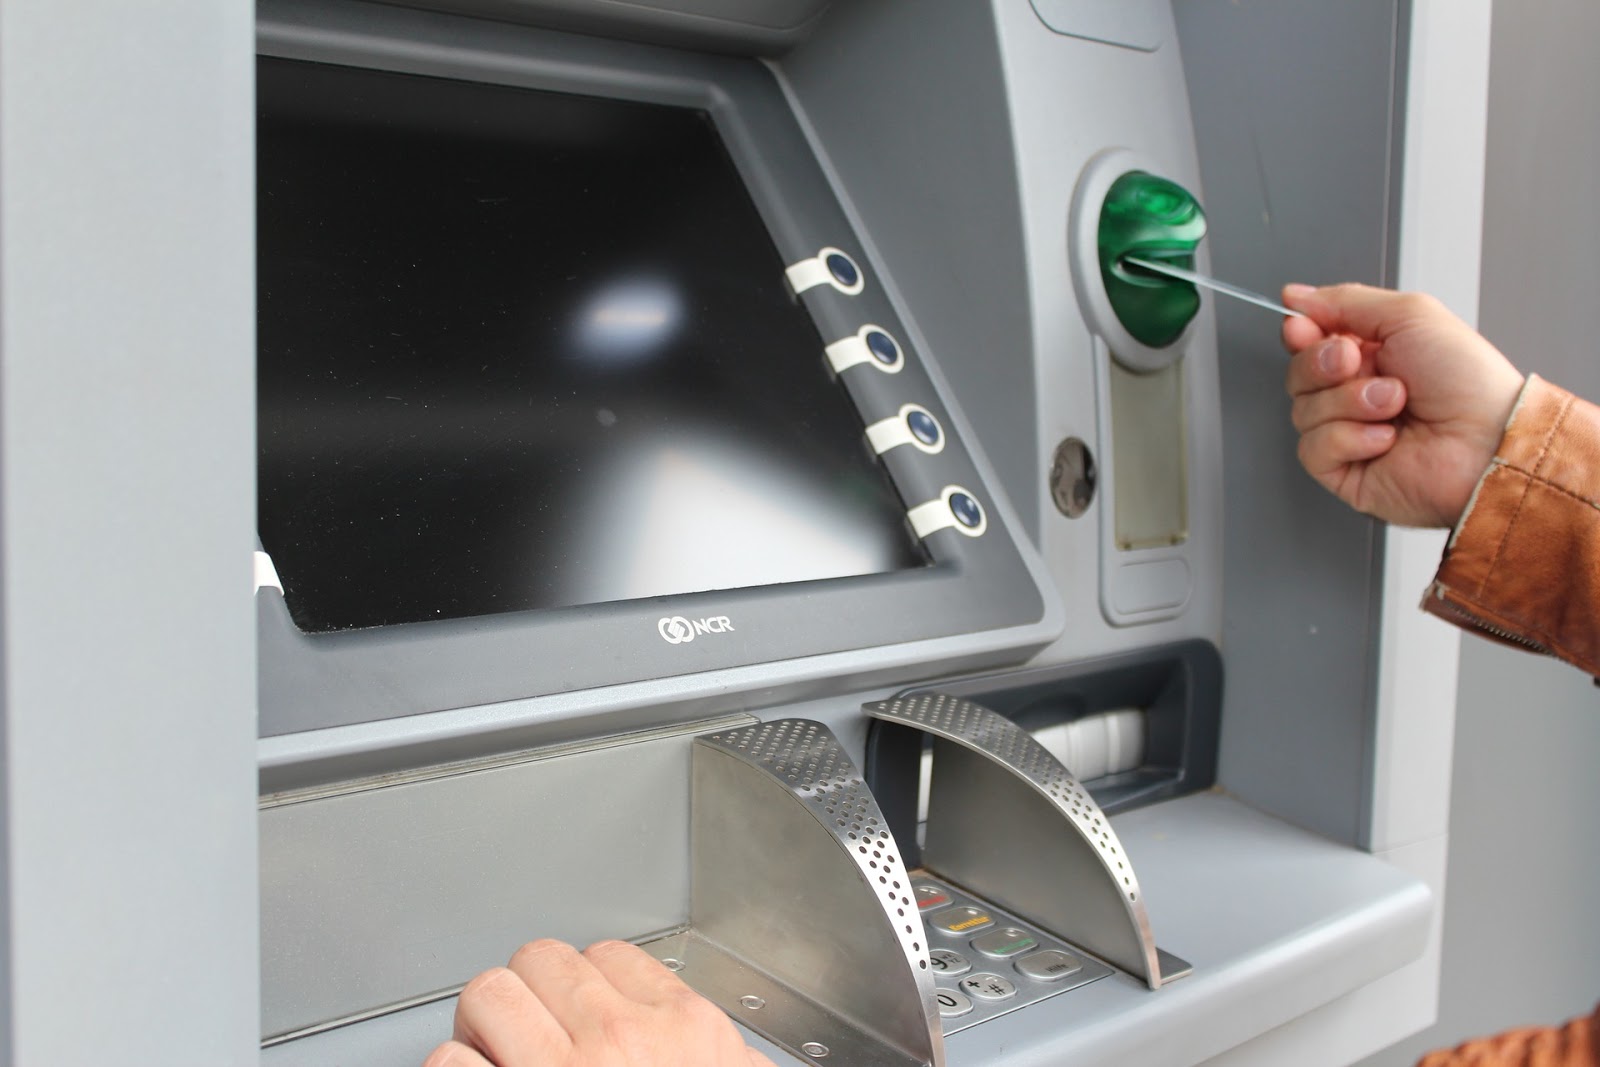 If you’ve ever used an ATM, you’ve used multifactor authentication.